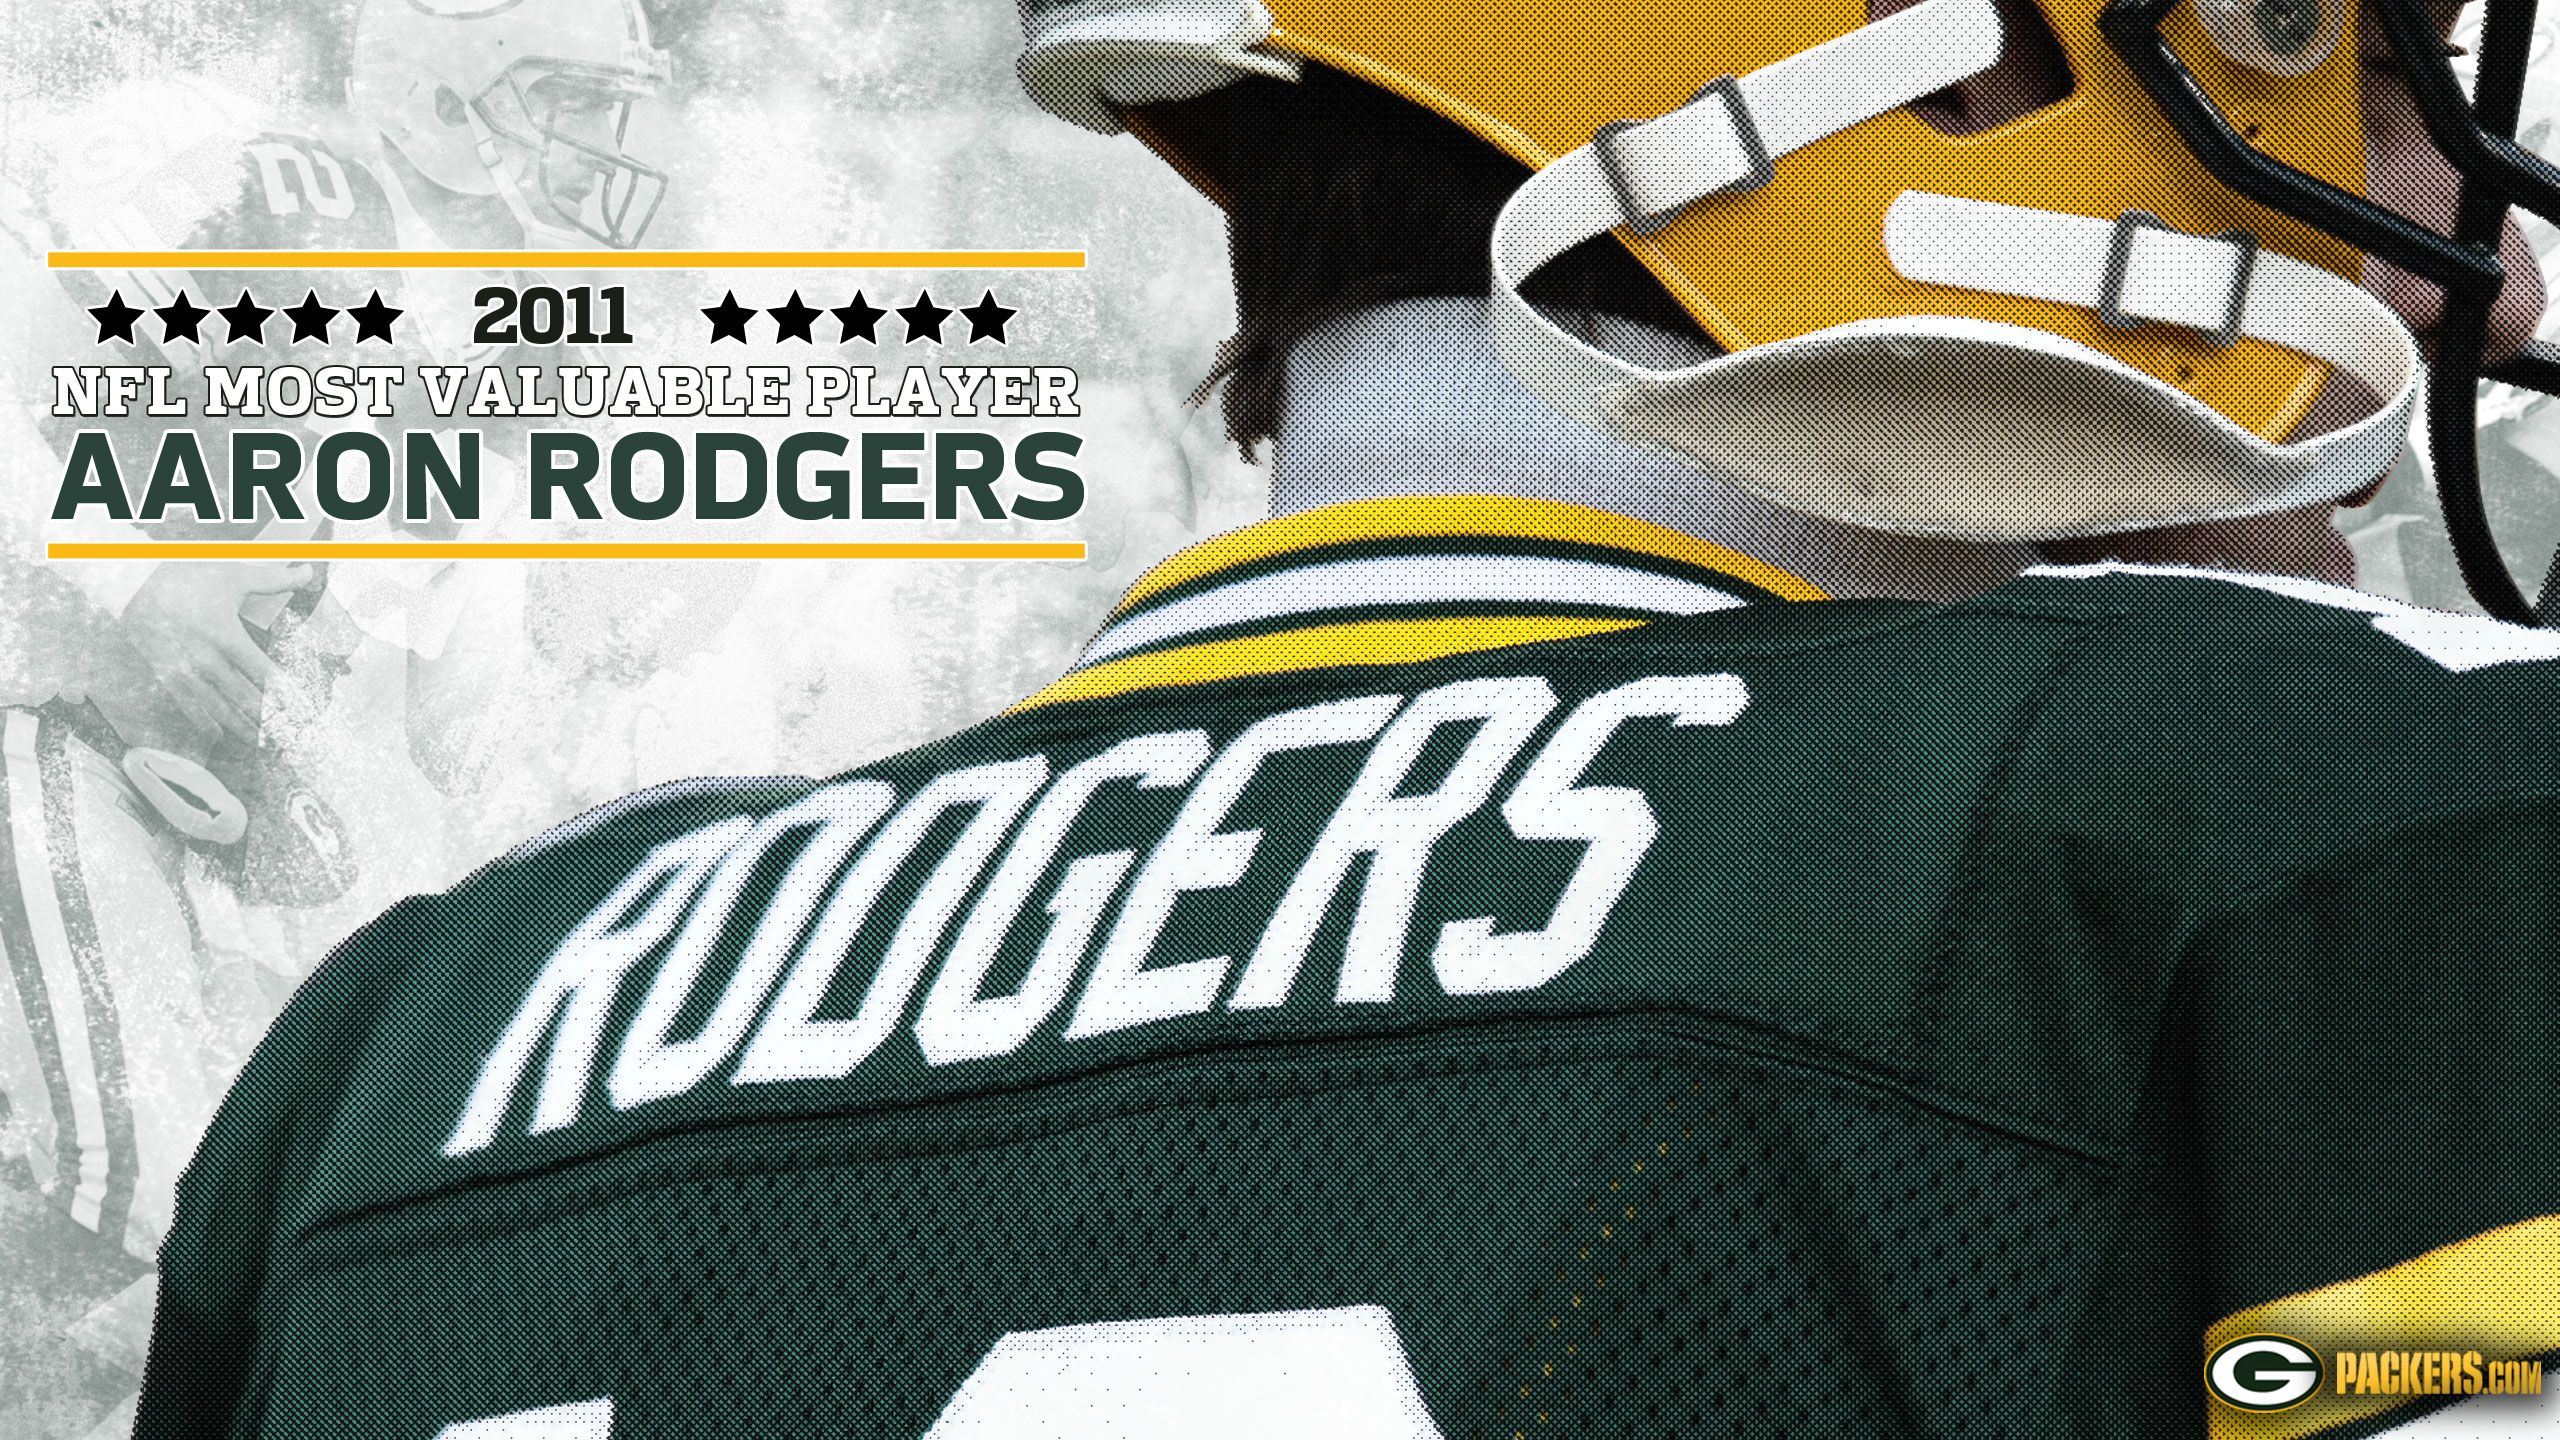 Packers.com | Wallpapers: 2011 Miscellaneous